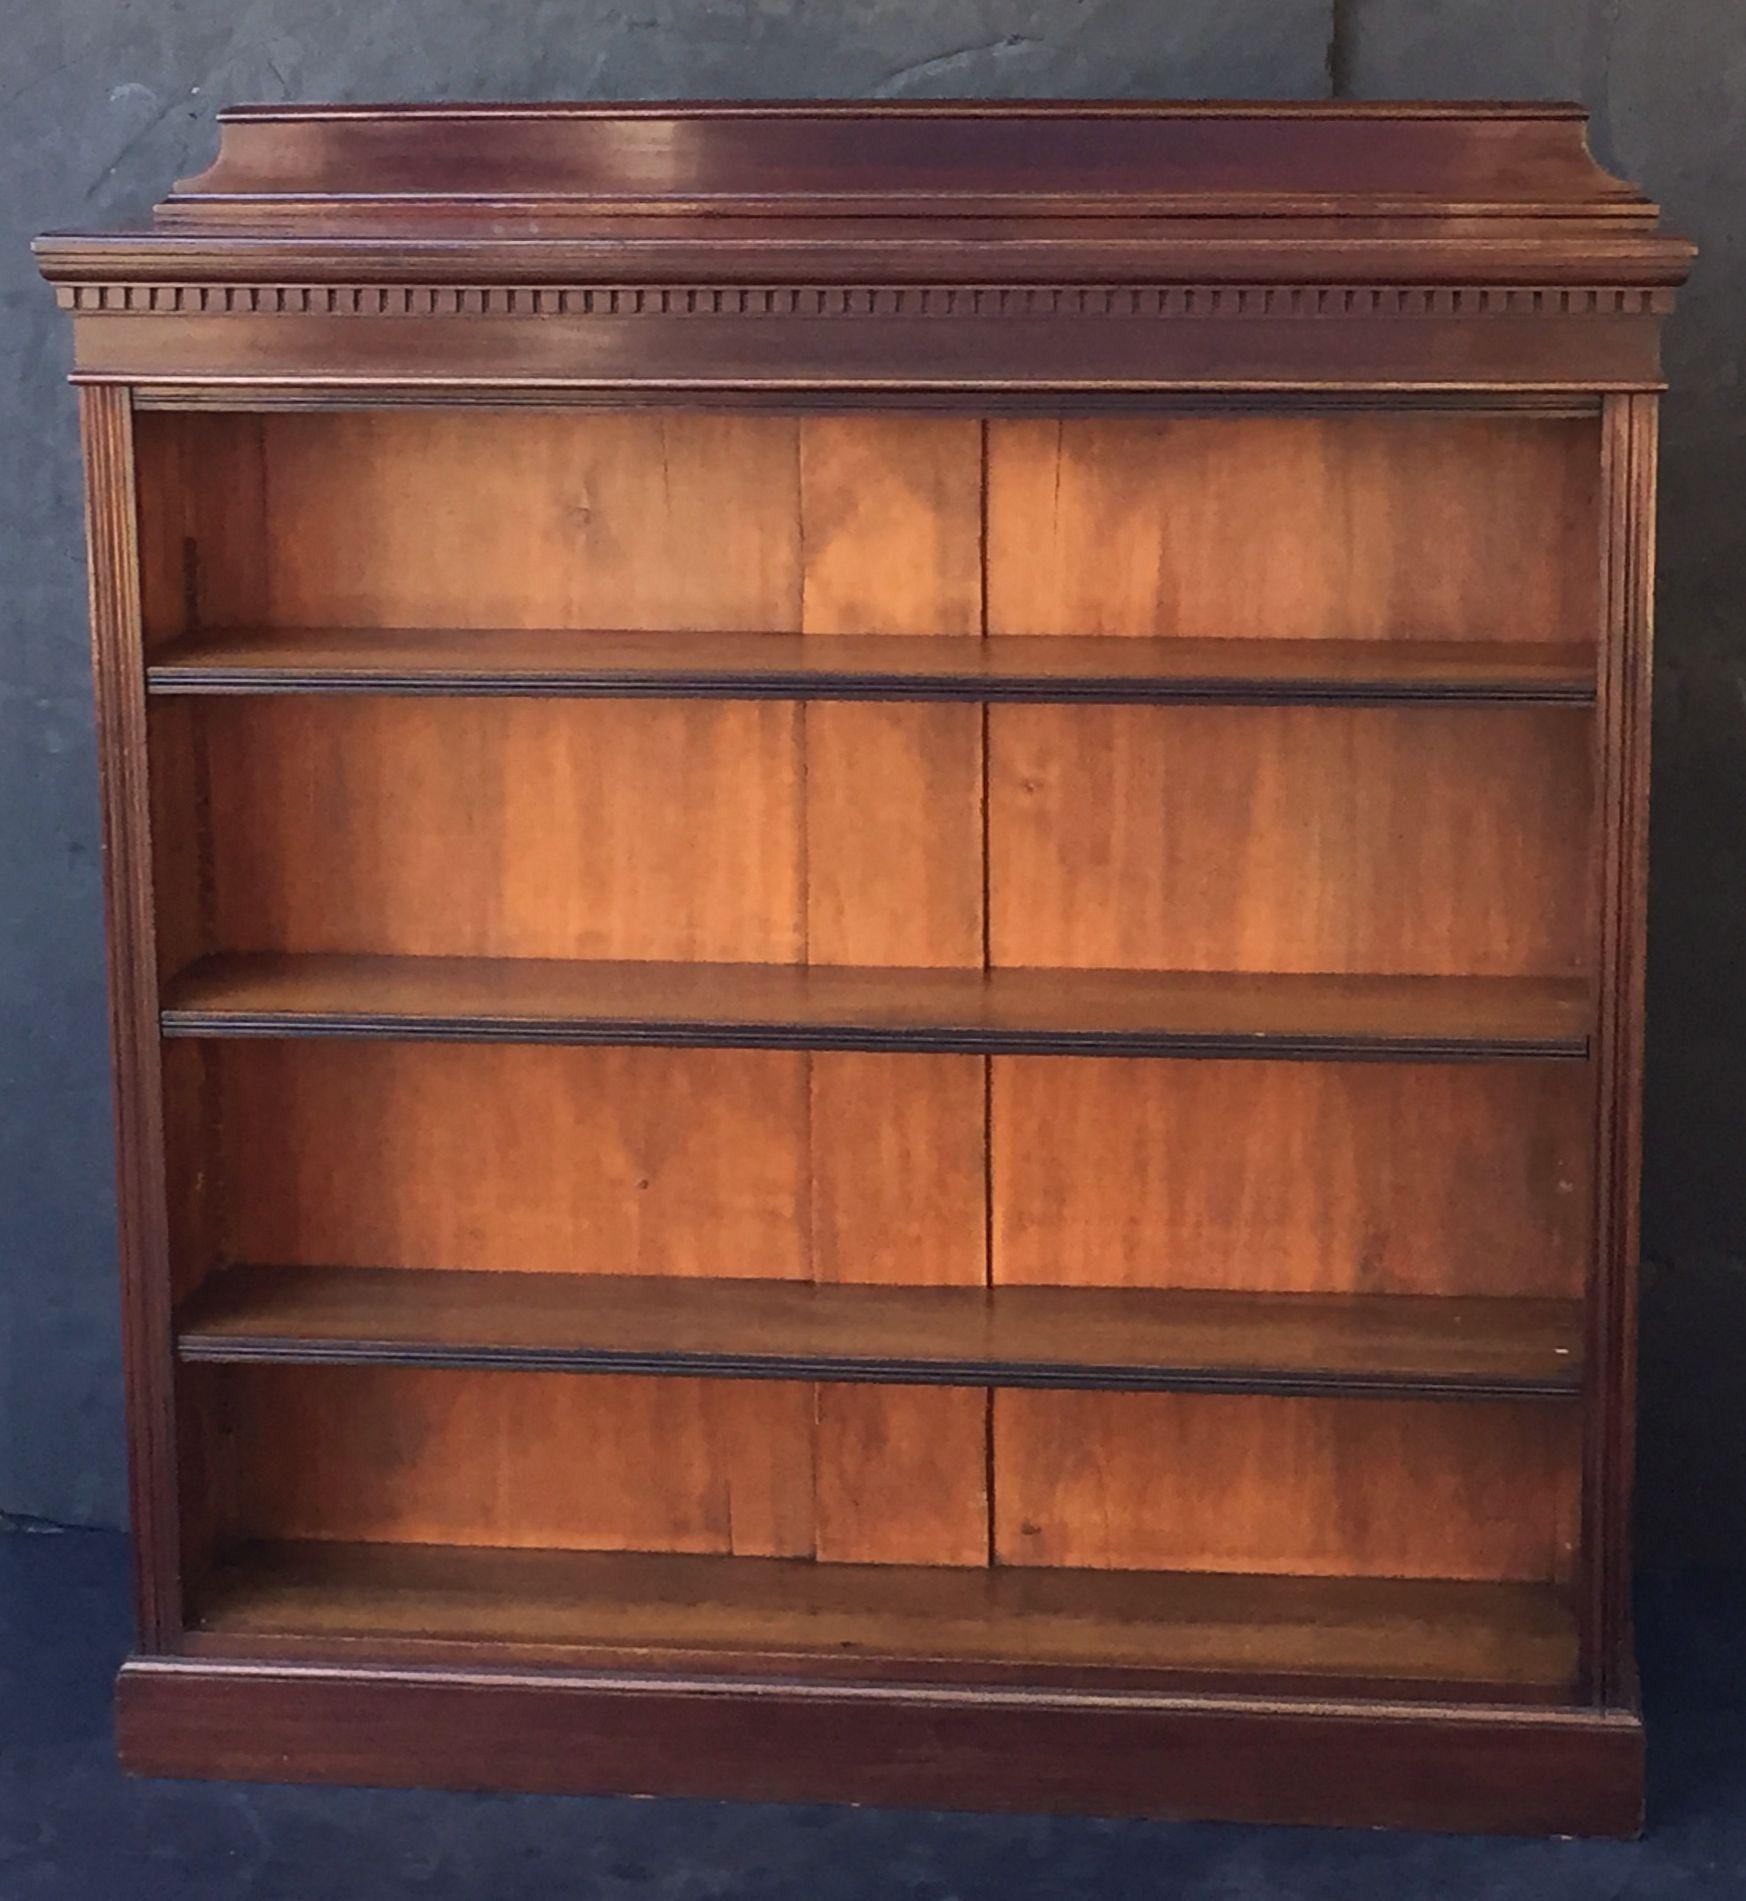 A fine English open-face bookcase of mahogany, with three adjustable shelves, featuring a moulded top and frieze with dentil trim, standing on a plinth base.